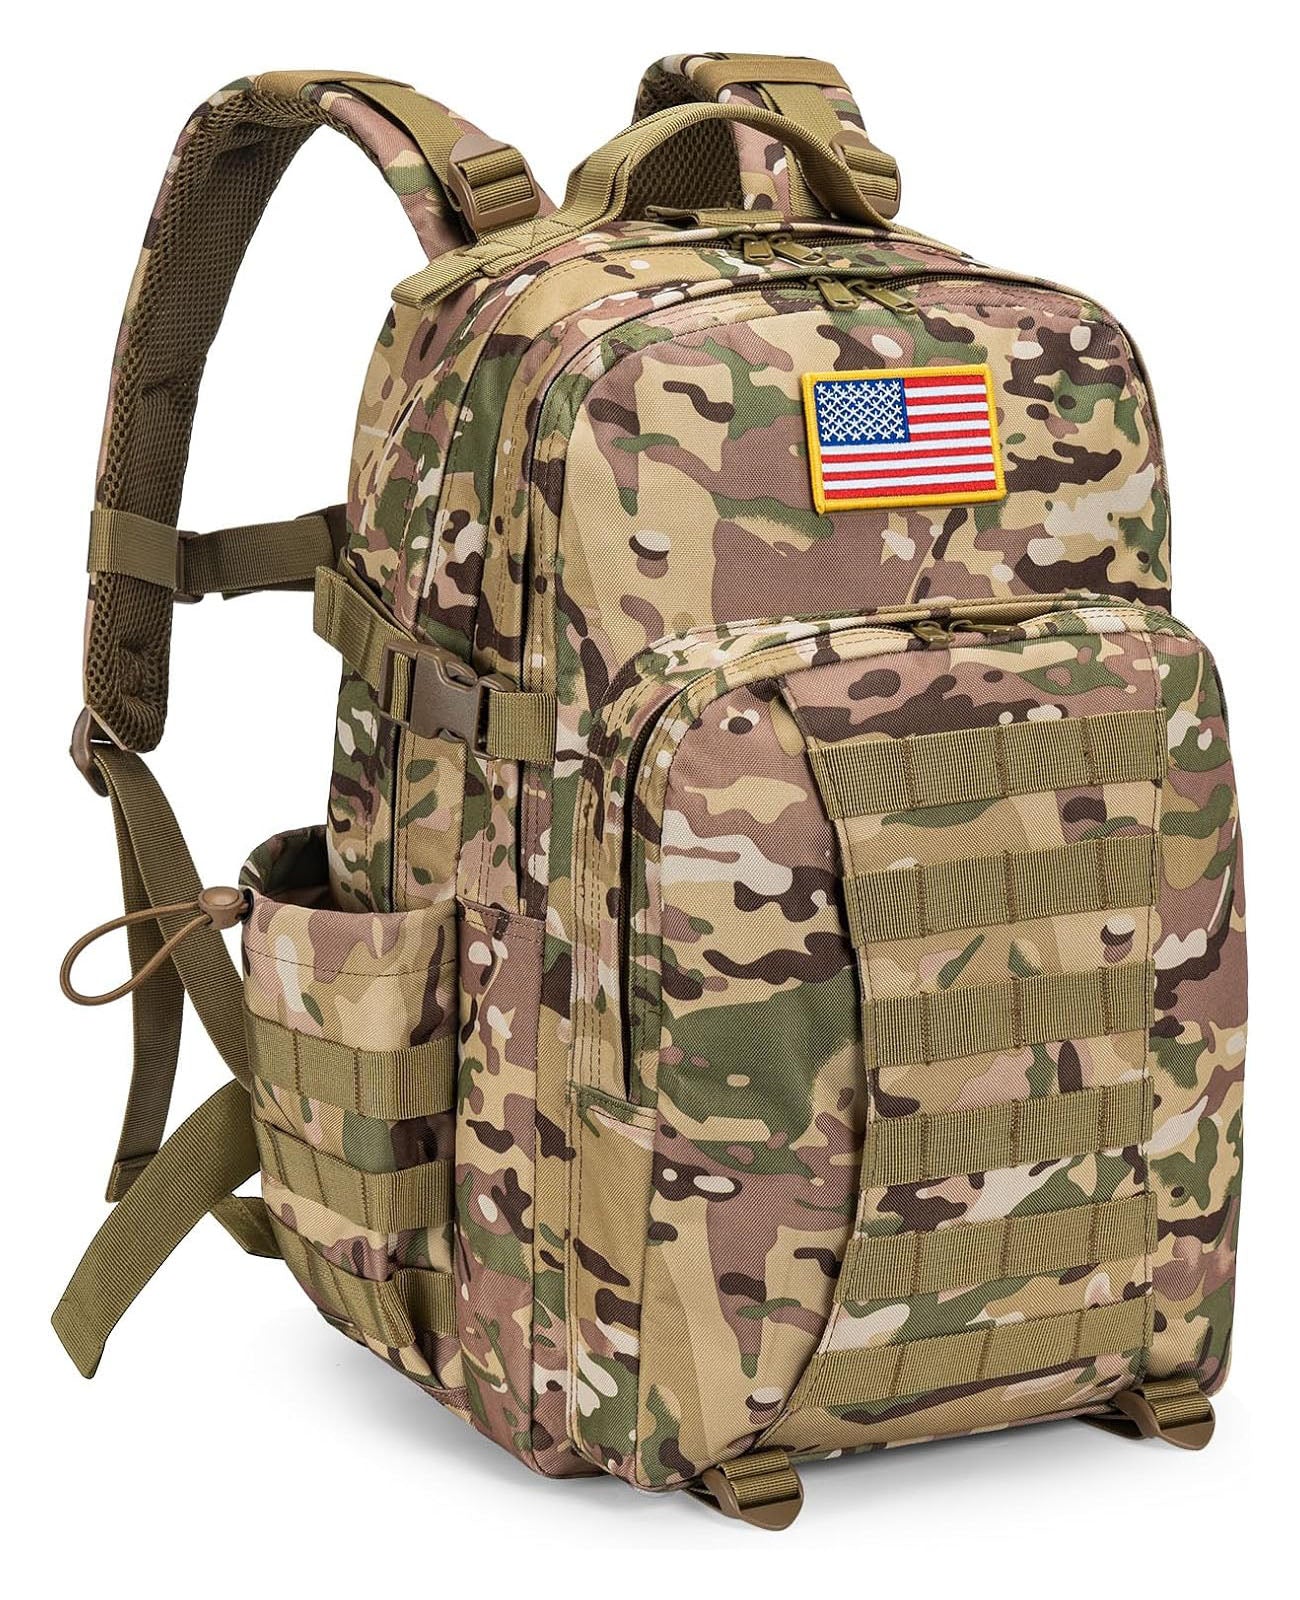 MILITARY BACK PACK - バッグ